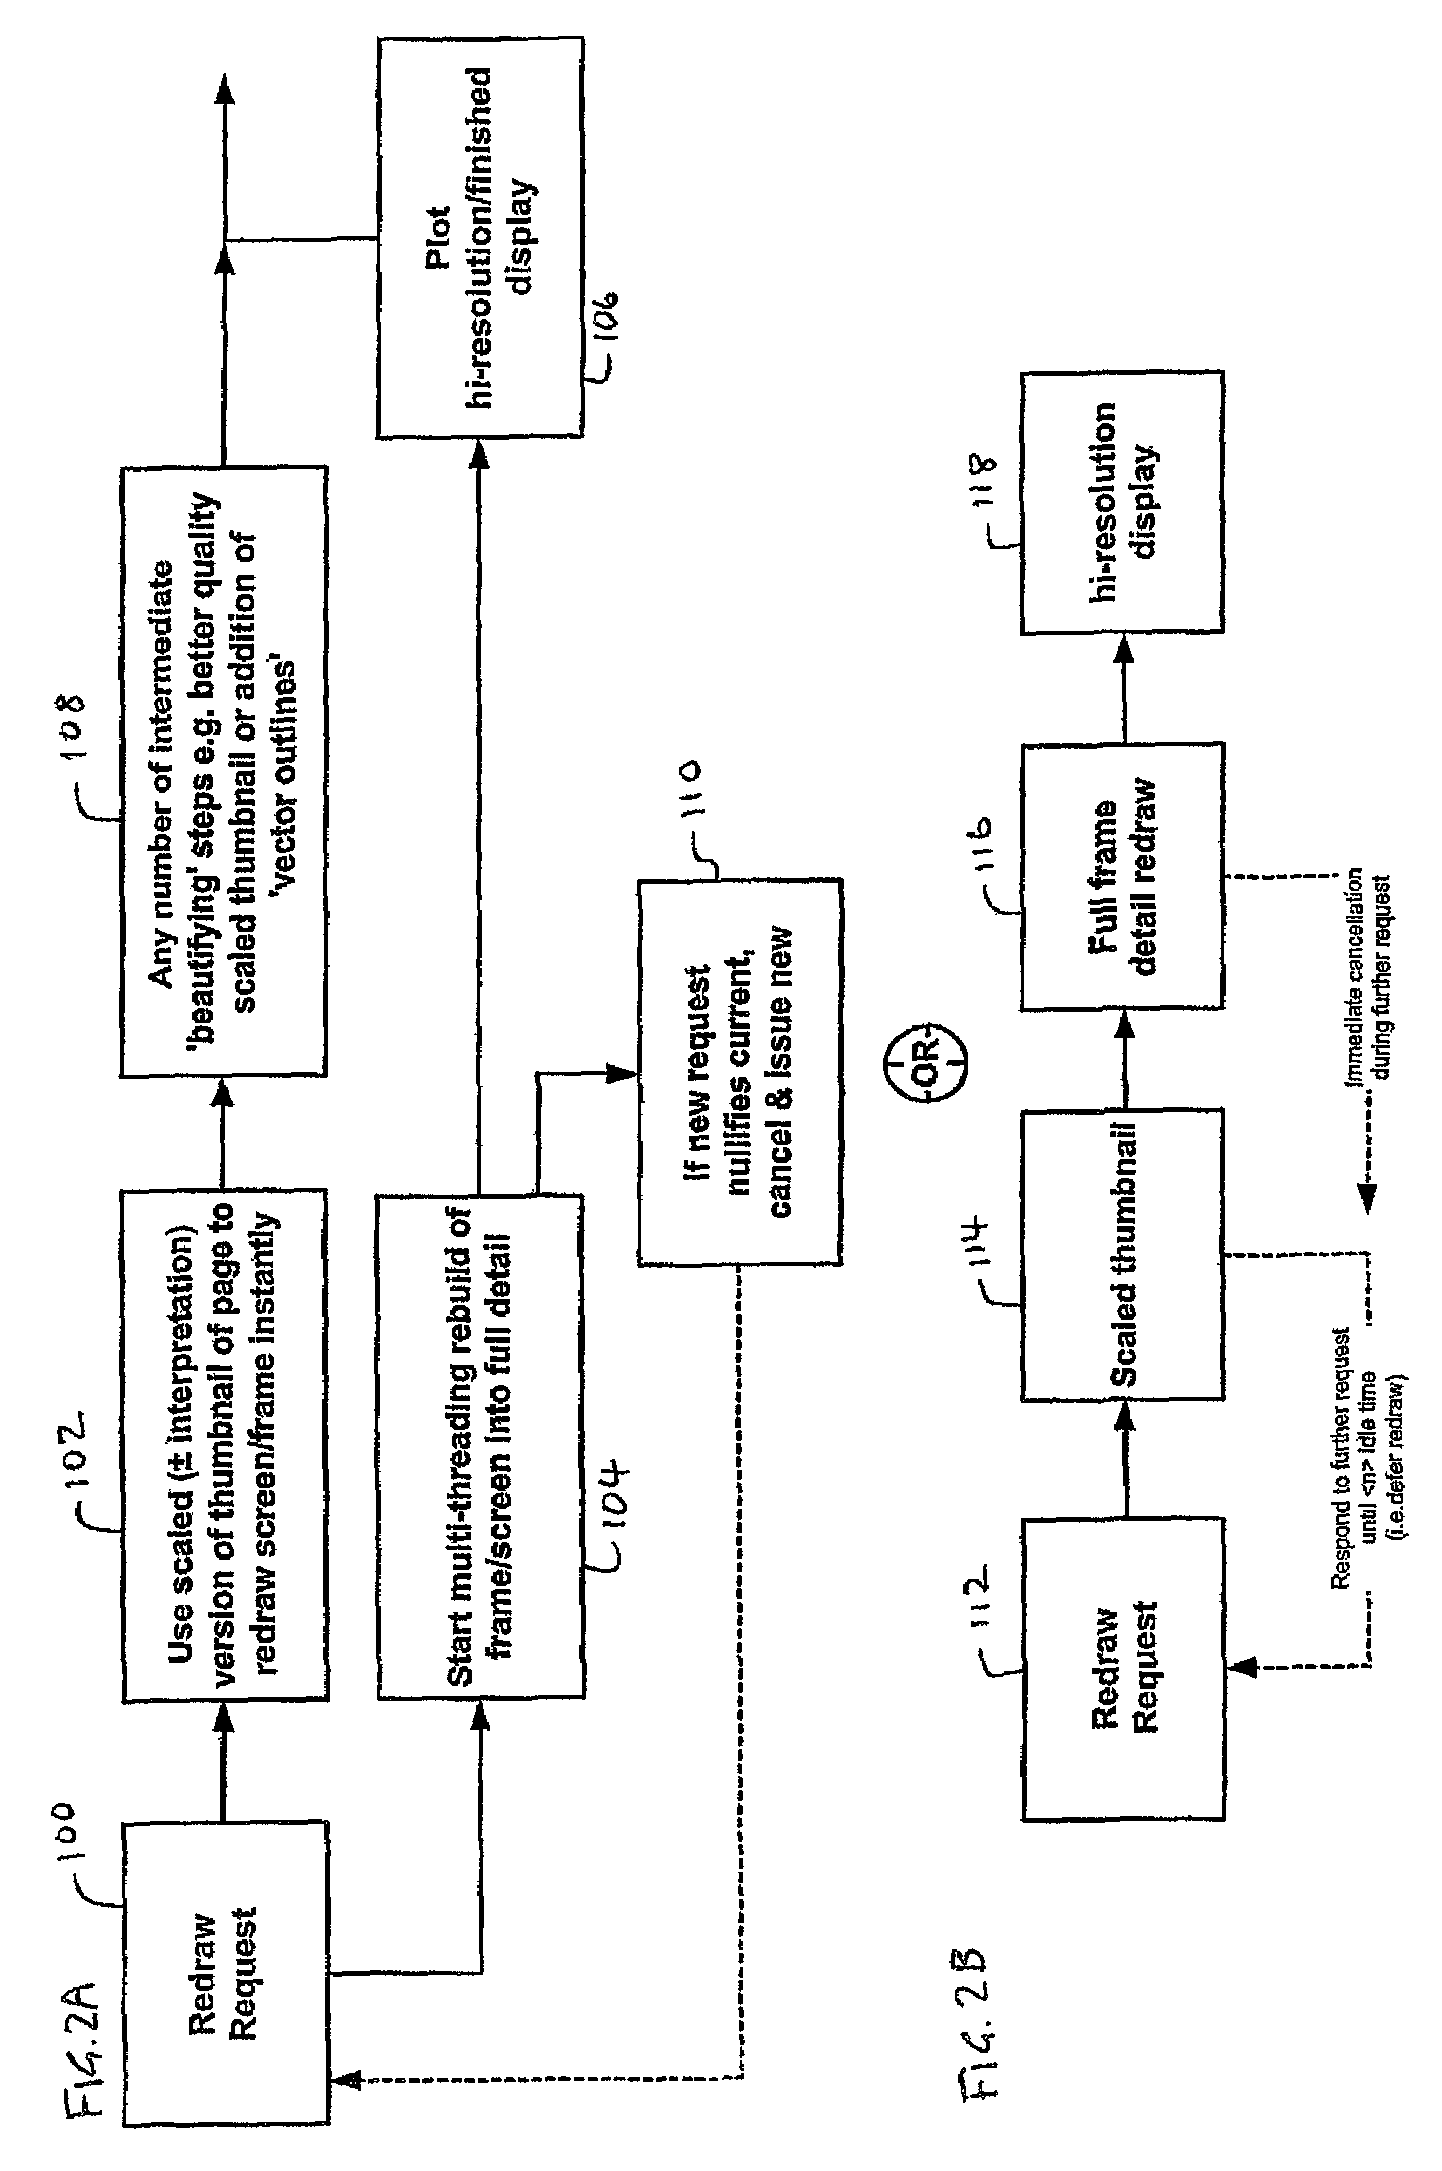 Systems and methods for generating visual representations of graphical data and digital document processing